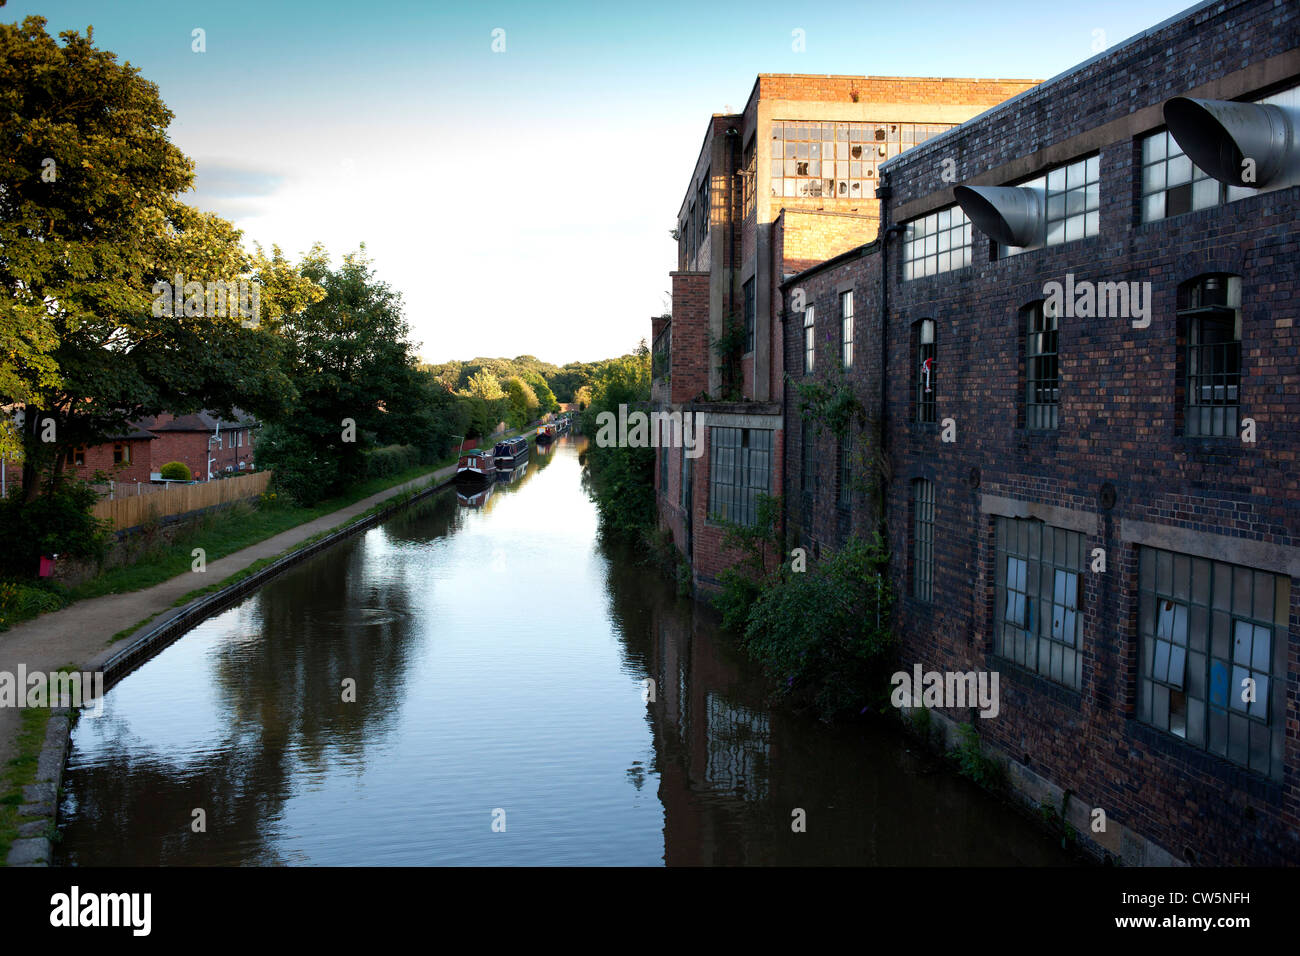 The Wilson & Stafford hat factory pictured overlooking the Coventry canal near the Coleshill Road in Atherstone. Stock Photo